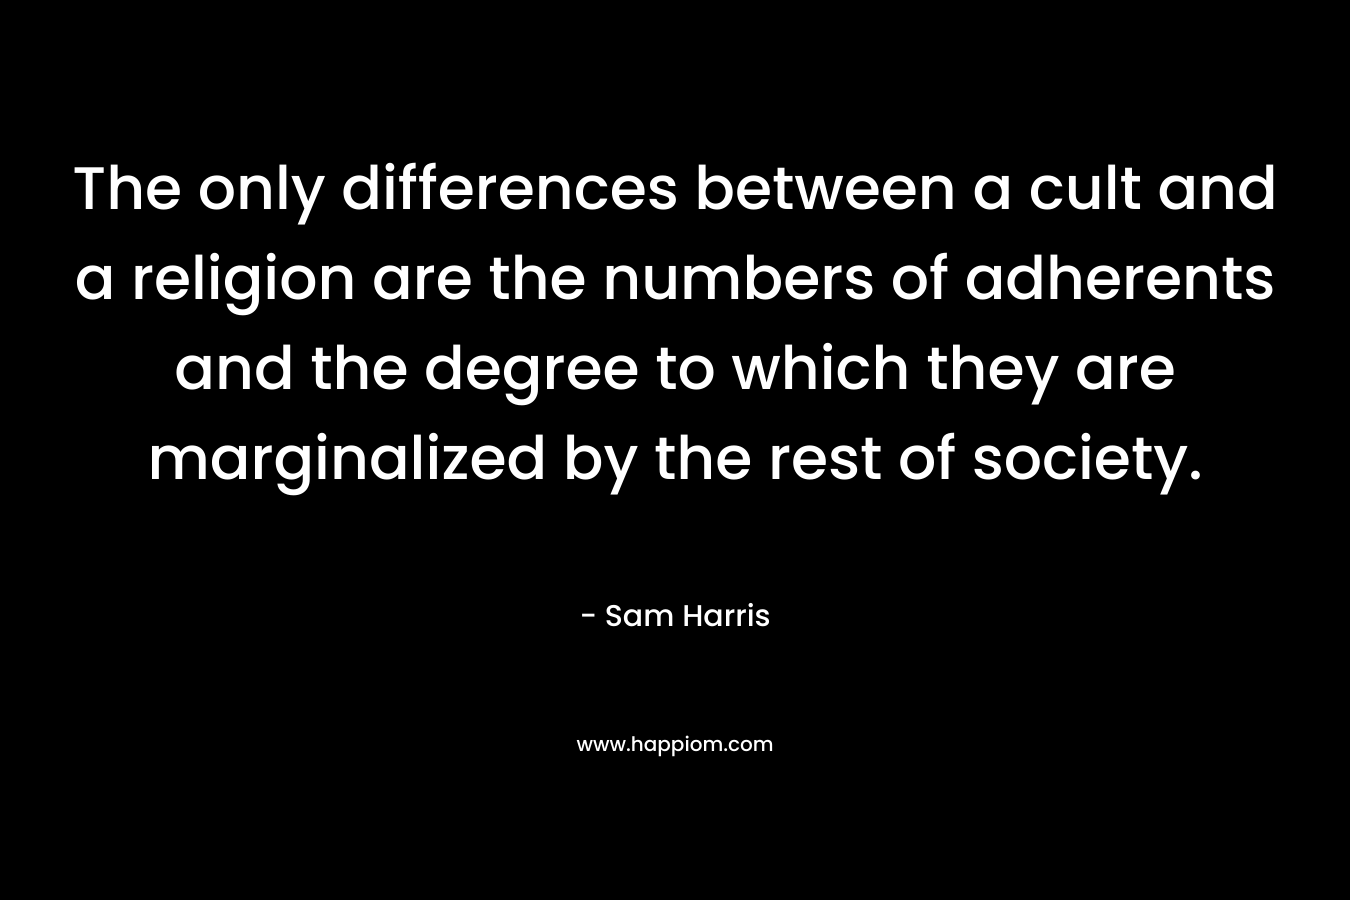 The only differences between a cult and a religion are the numbers of adherents and the degree to which they are marginalized by the rest of society. – Sam Harris